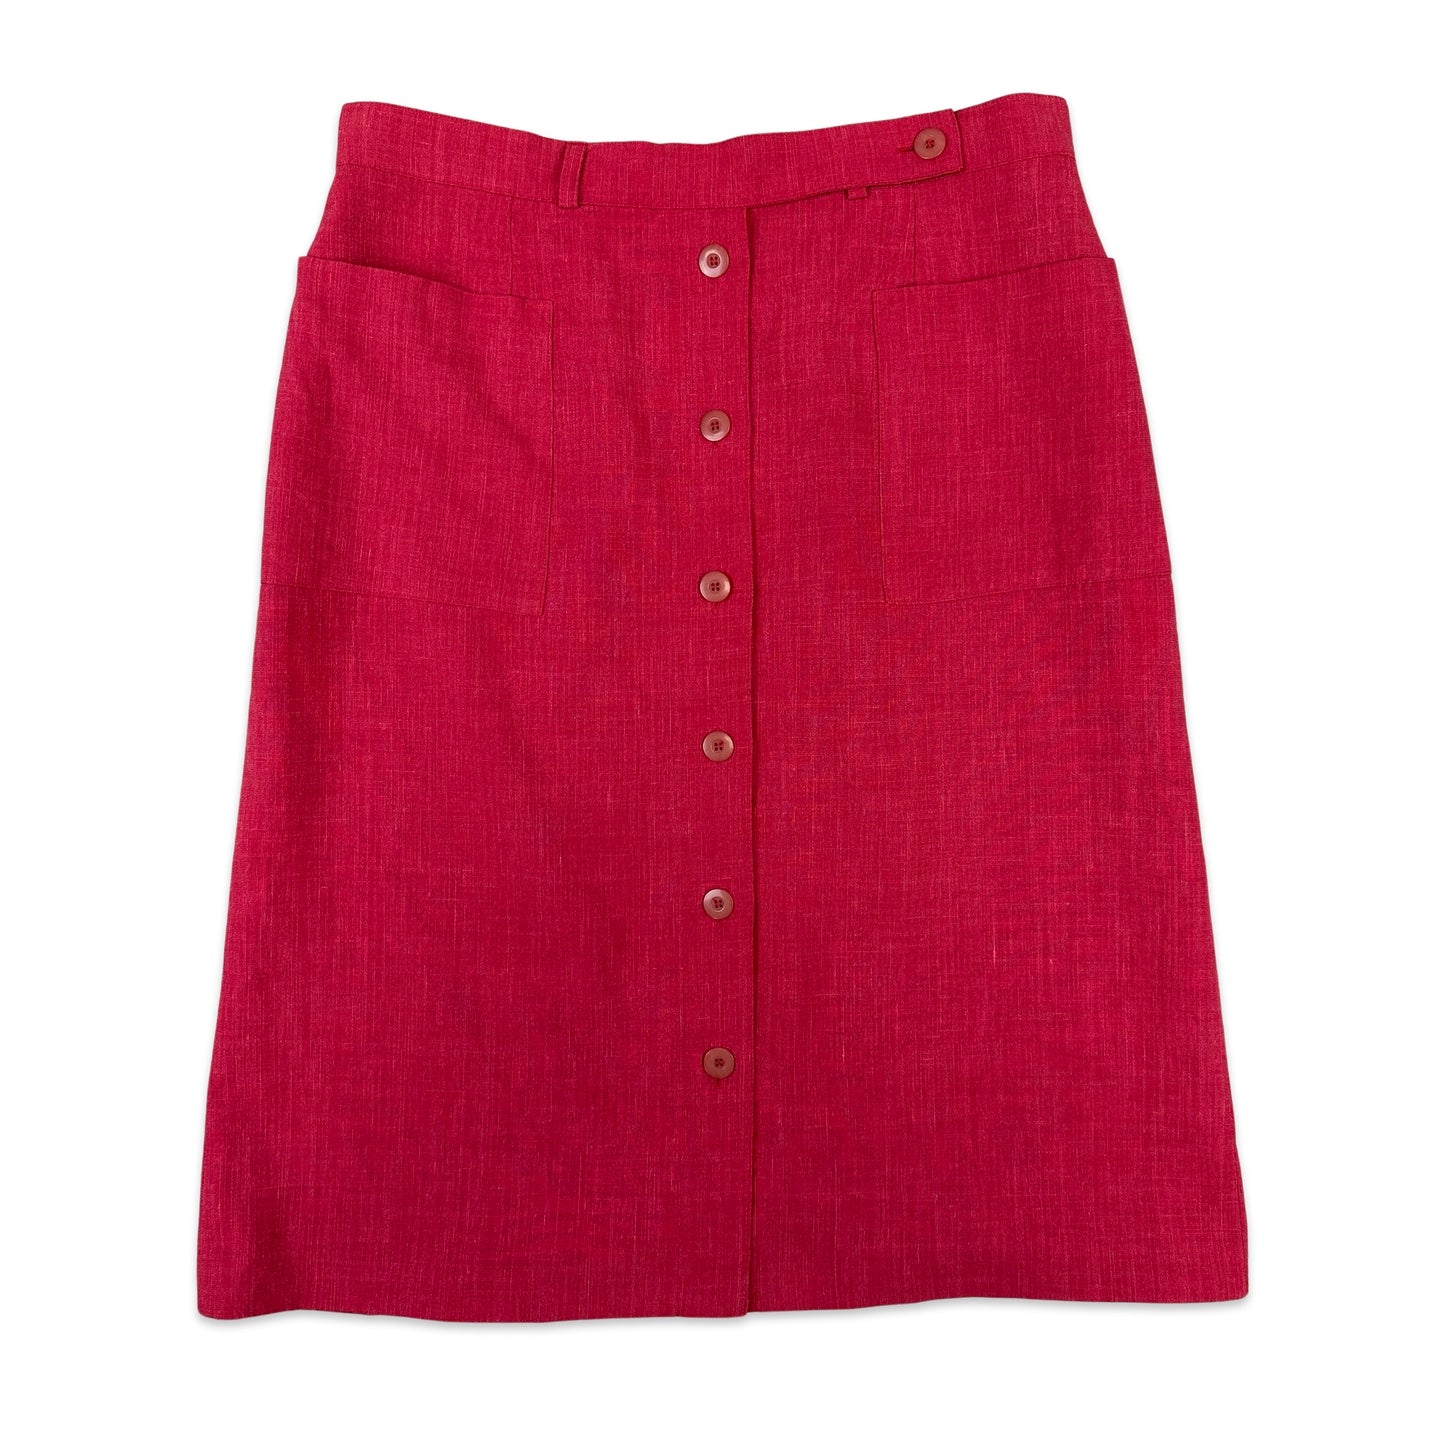 90s Vintage Pink Button Down Skirt 16